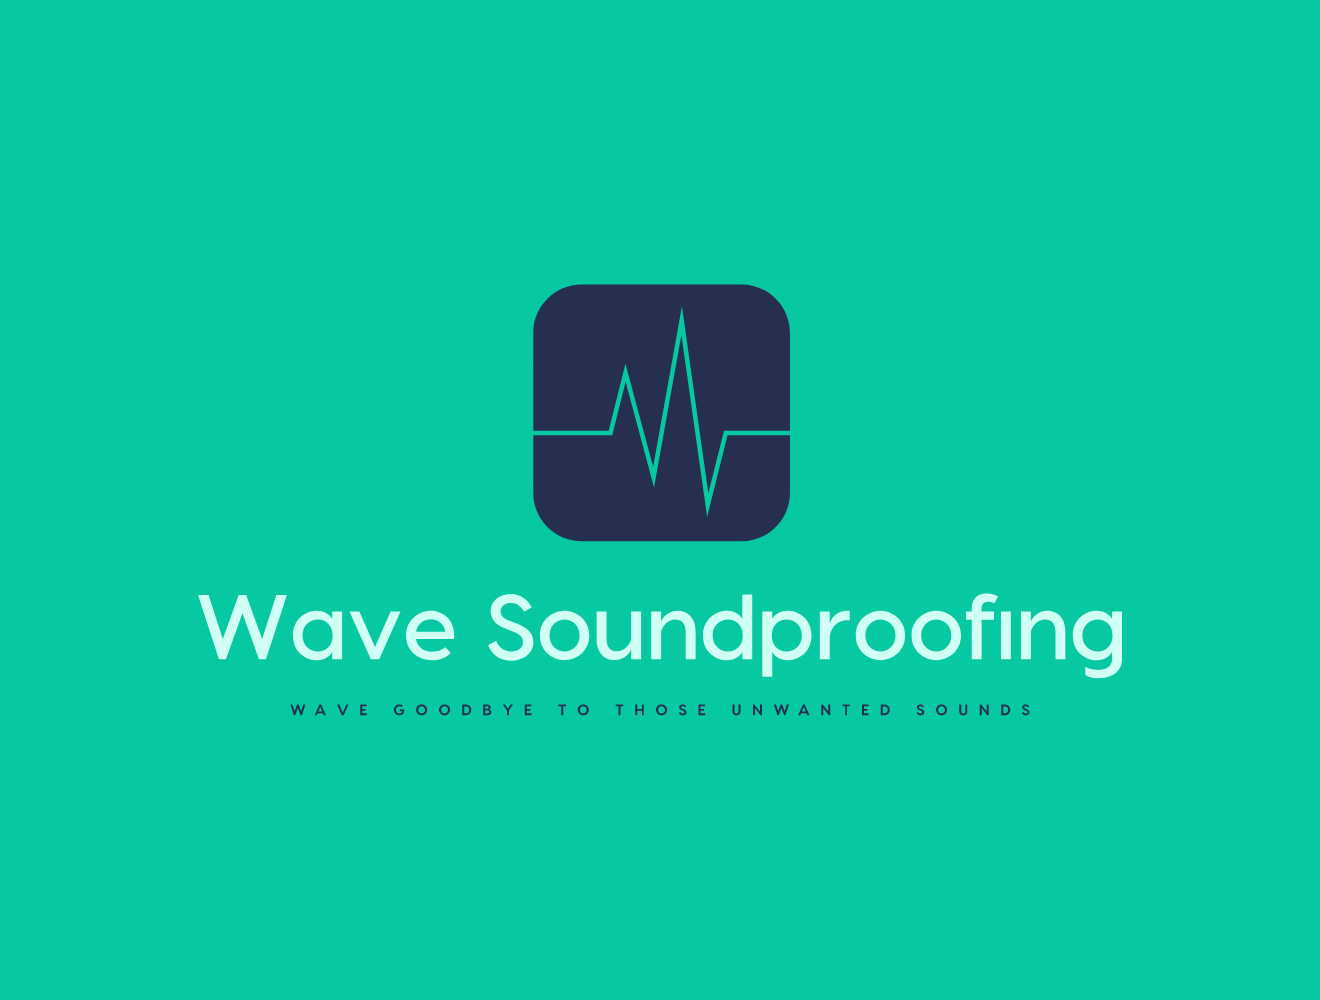 Wave Soundproofing